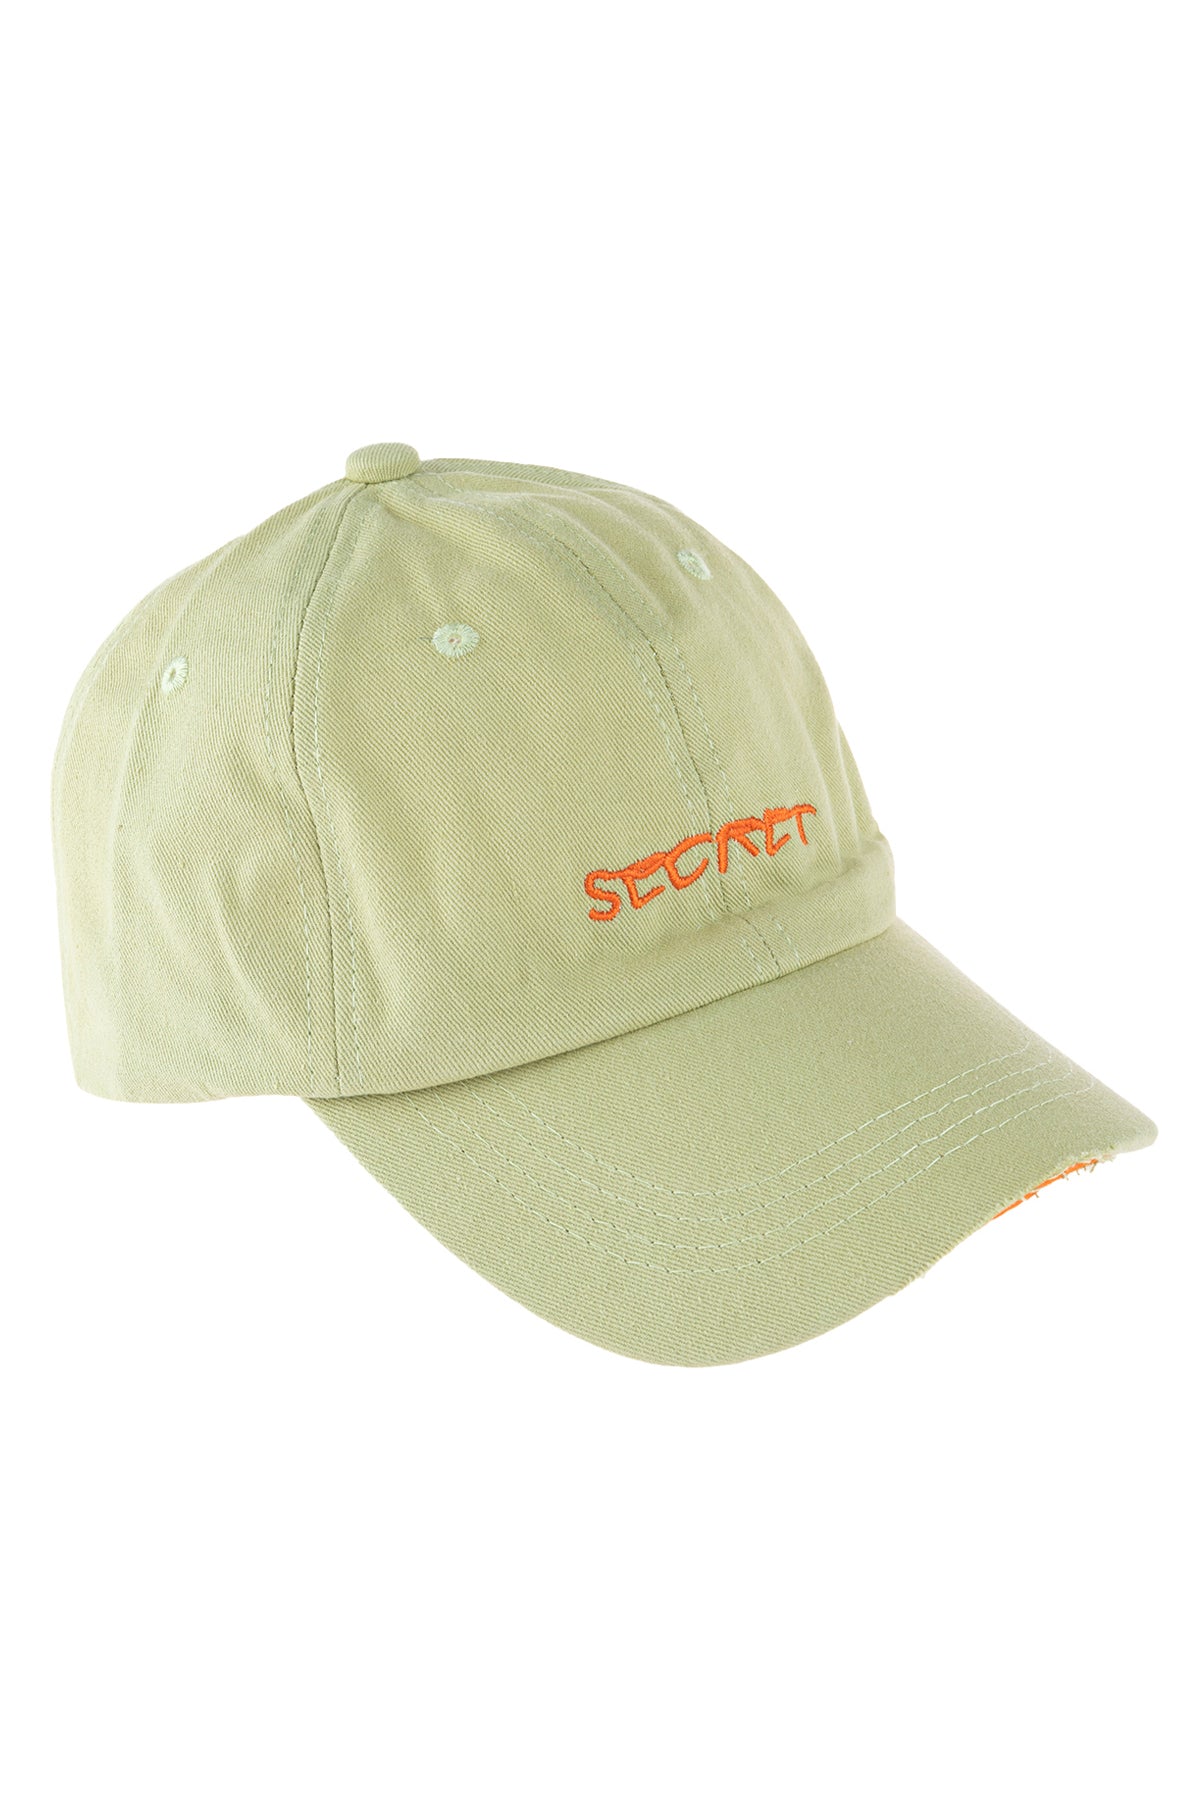 SECRET EMBROIDERED CAP/6PCS (NOW $1.00 ONLY!)